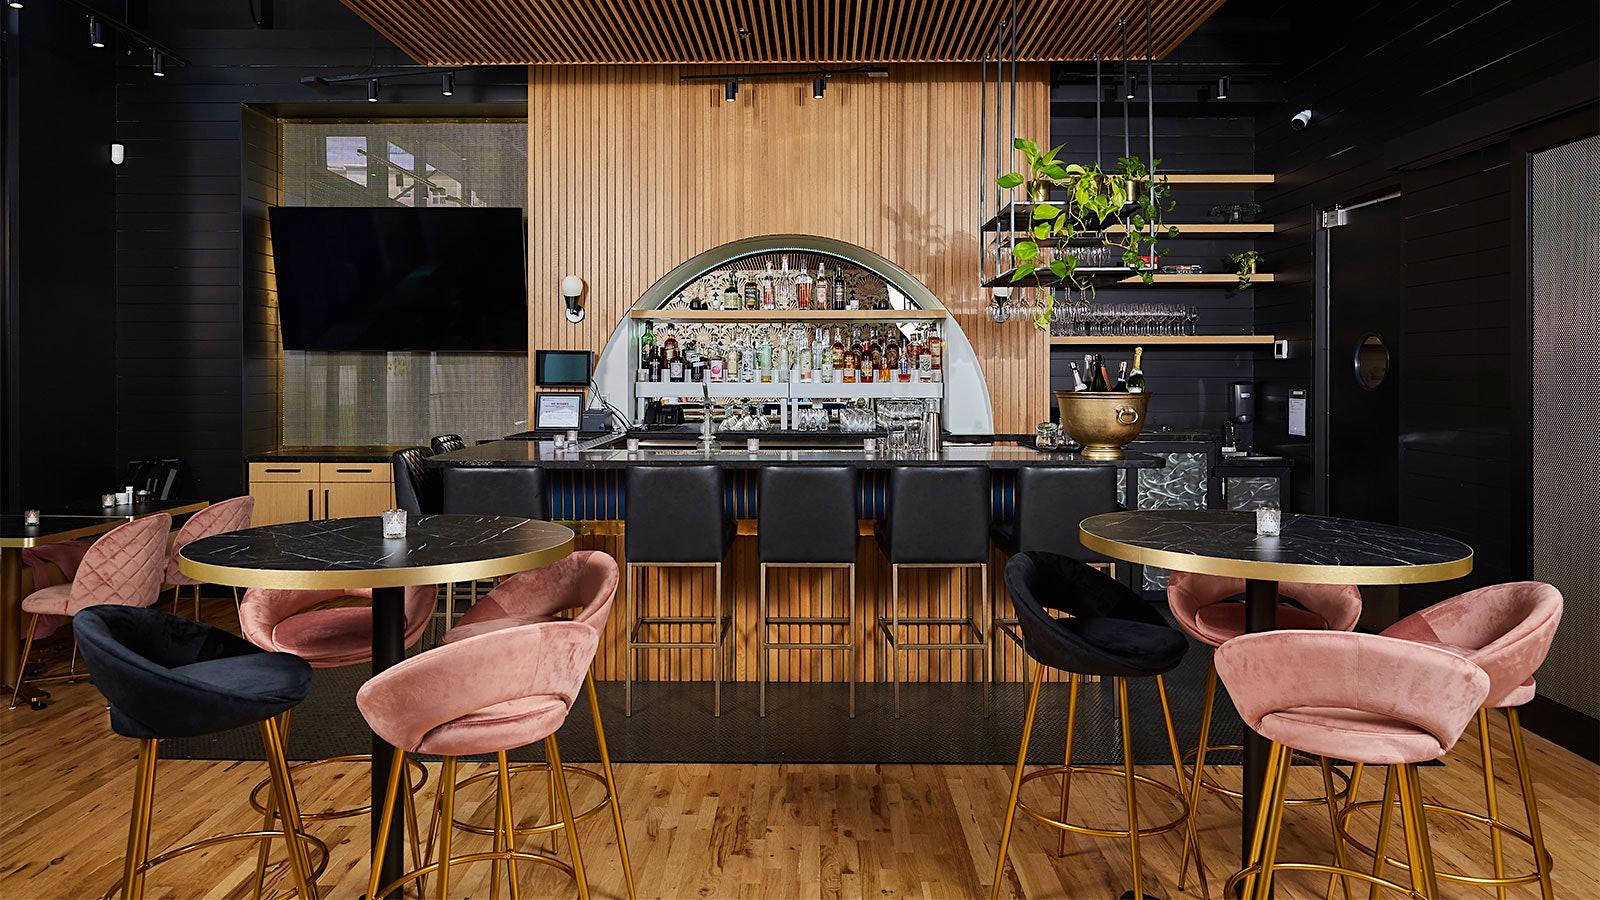  The sleek bar area at Bar Moore in Bellevue, with bottles displayed in an arched inset